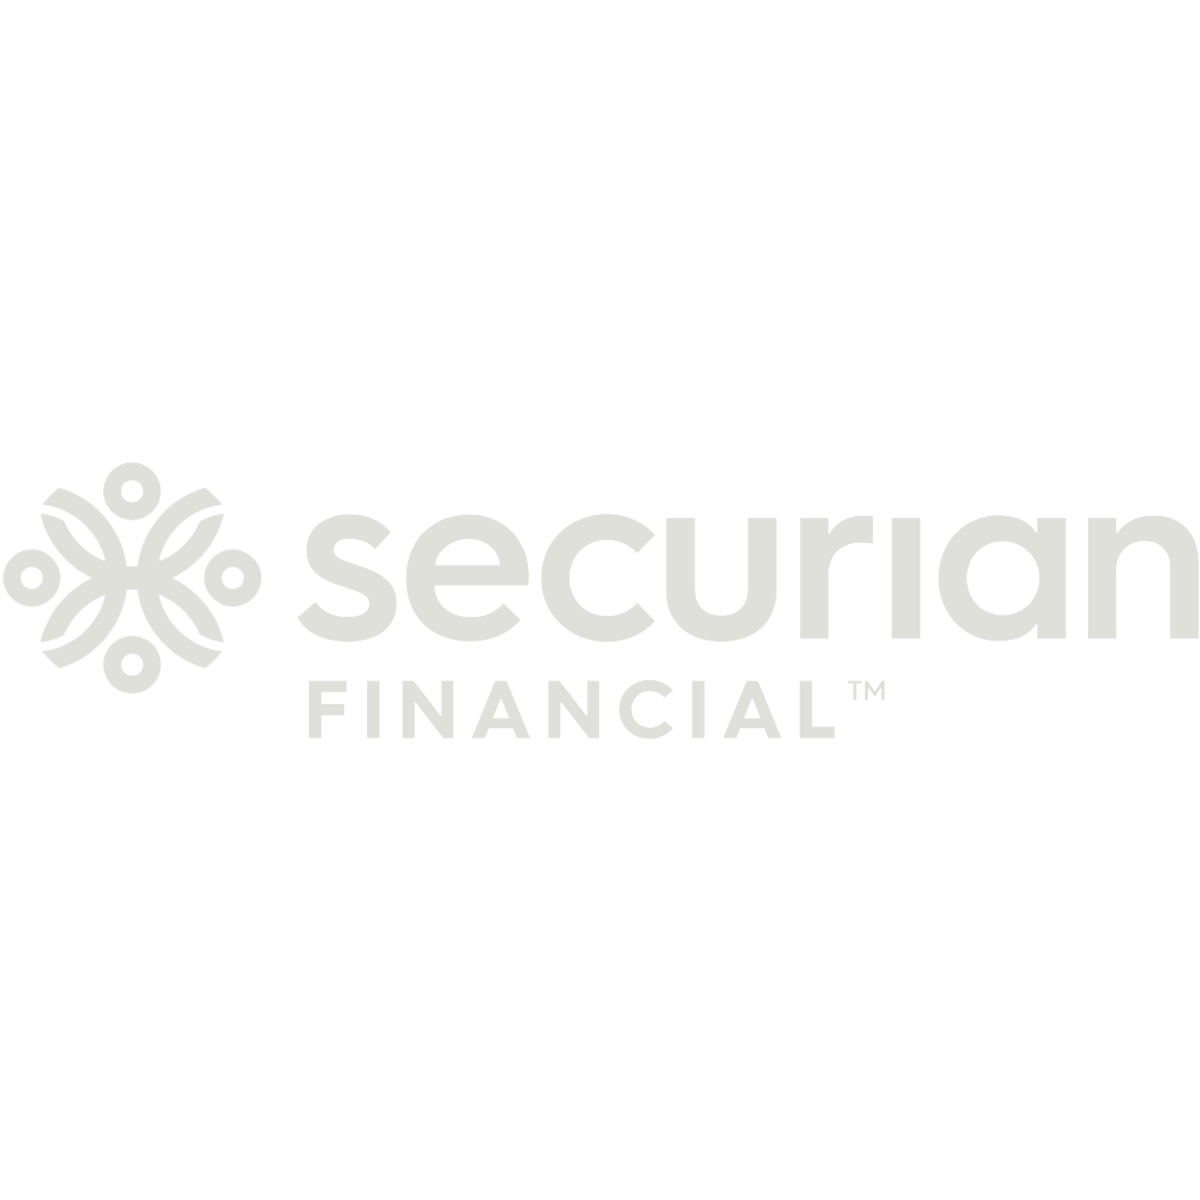 securian.png